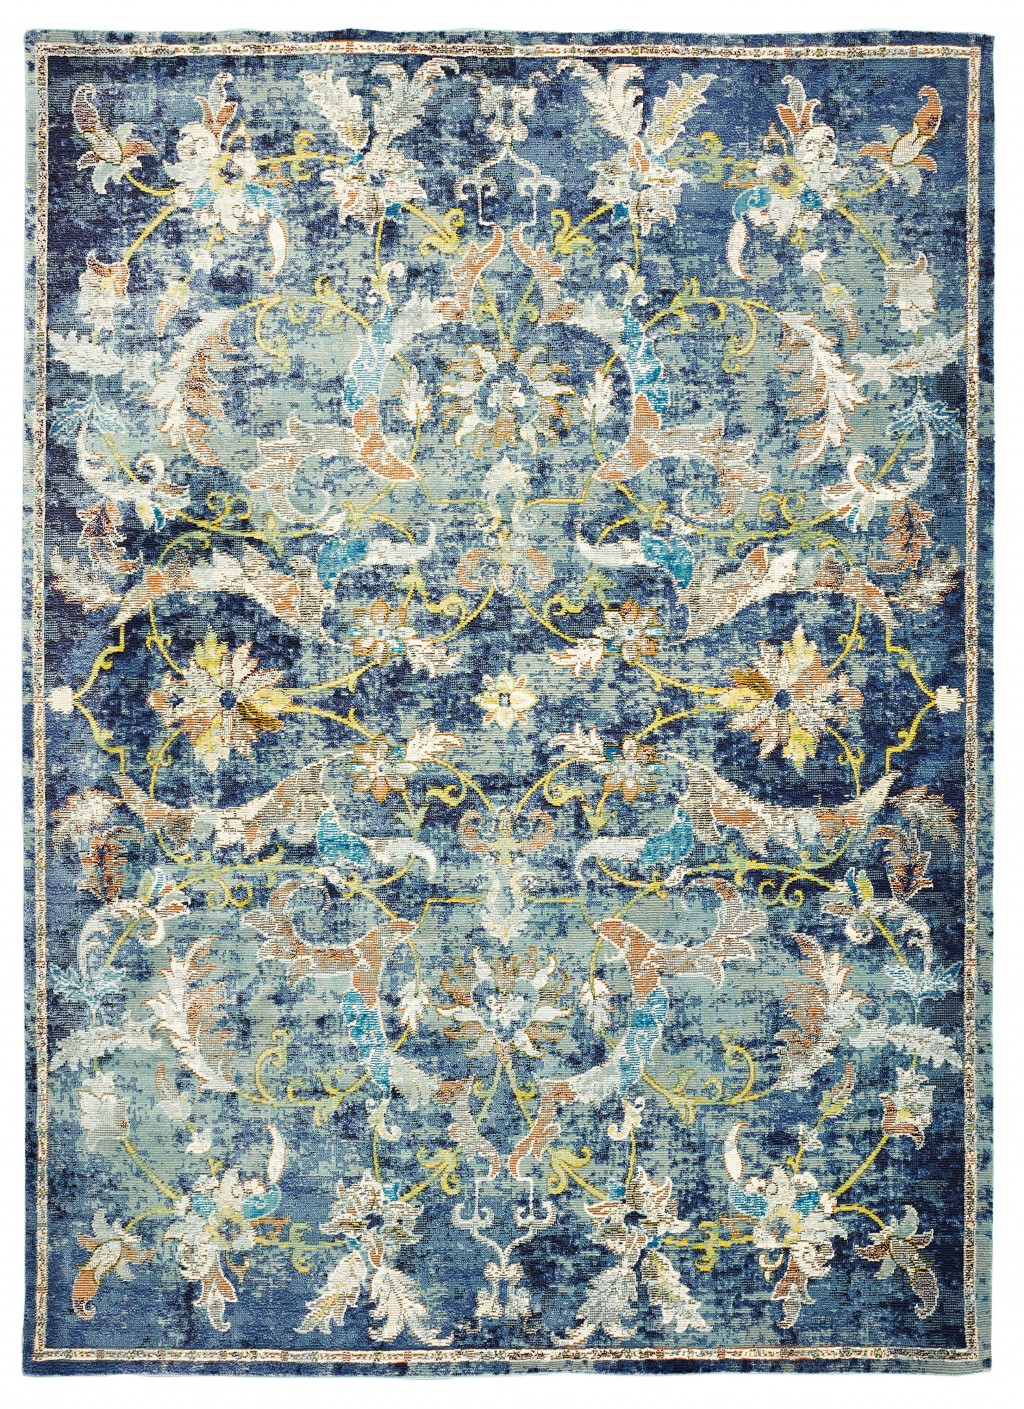 8’ x 10’ Blue and White Jacobean Pattern Area Rug-395706-1